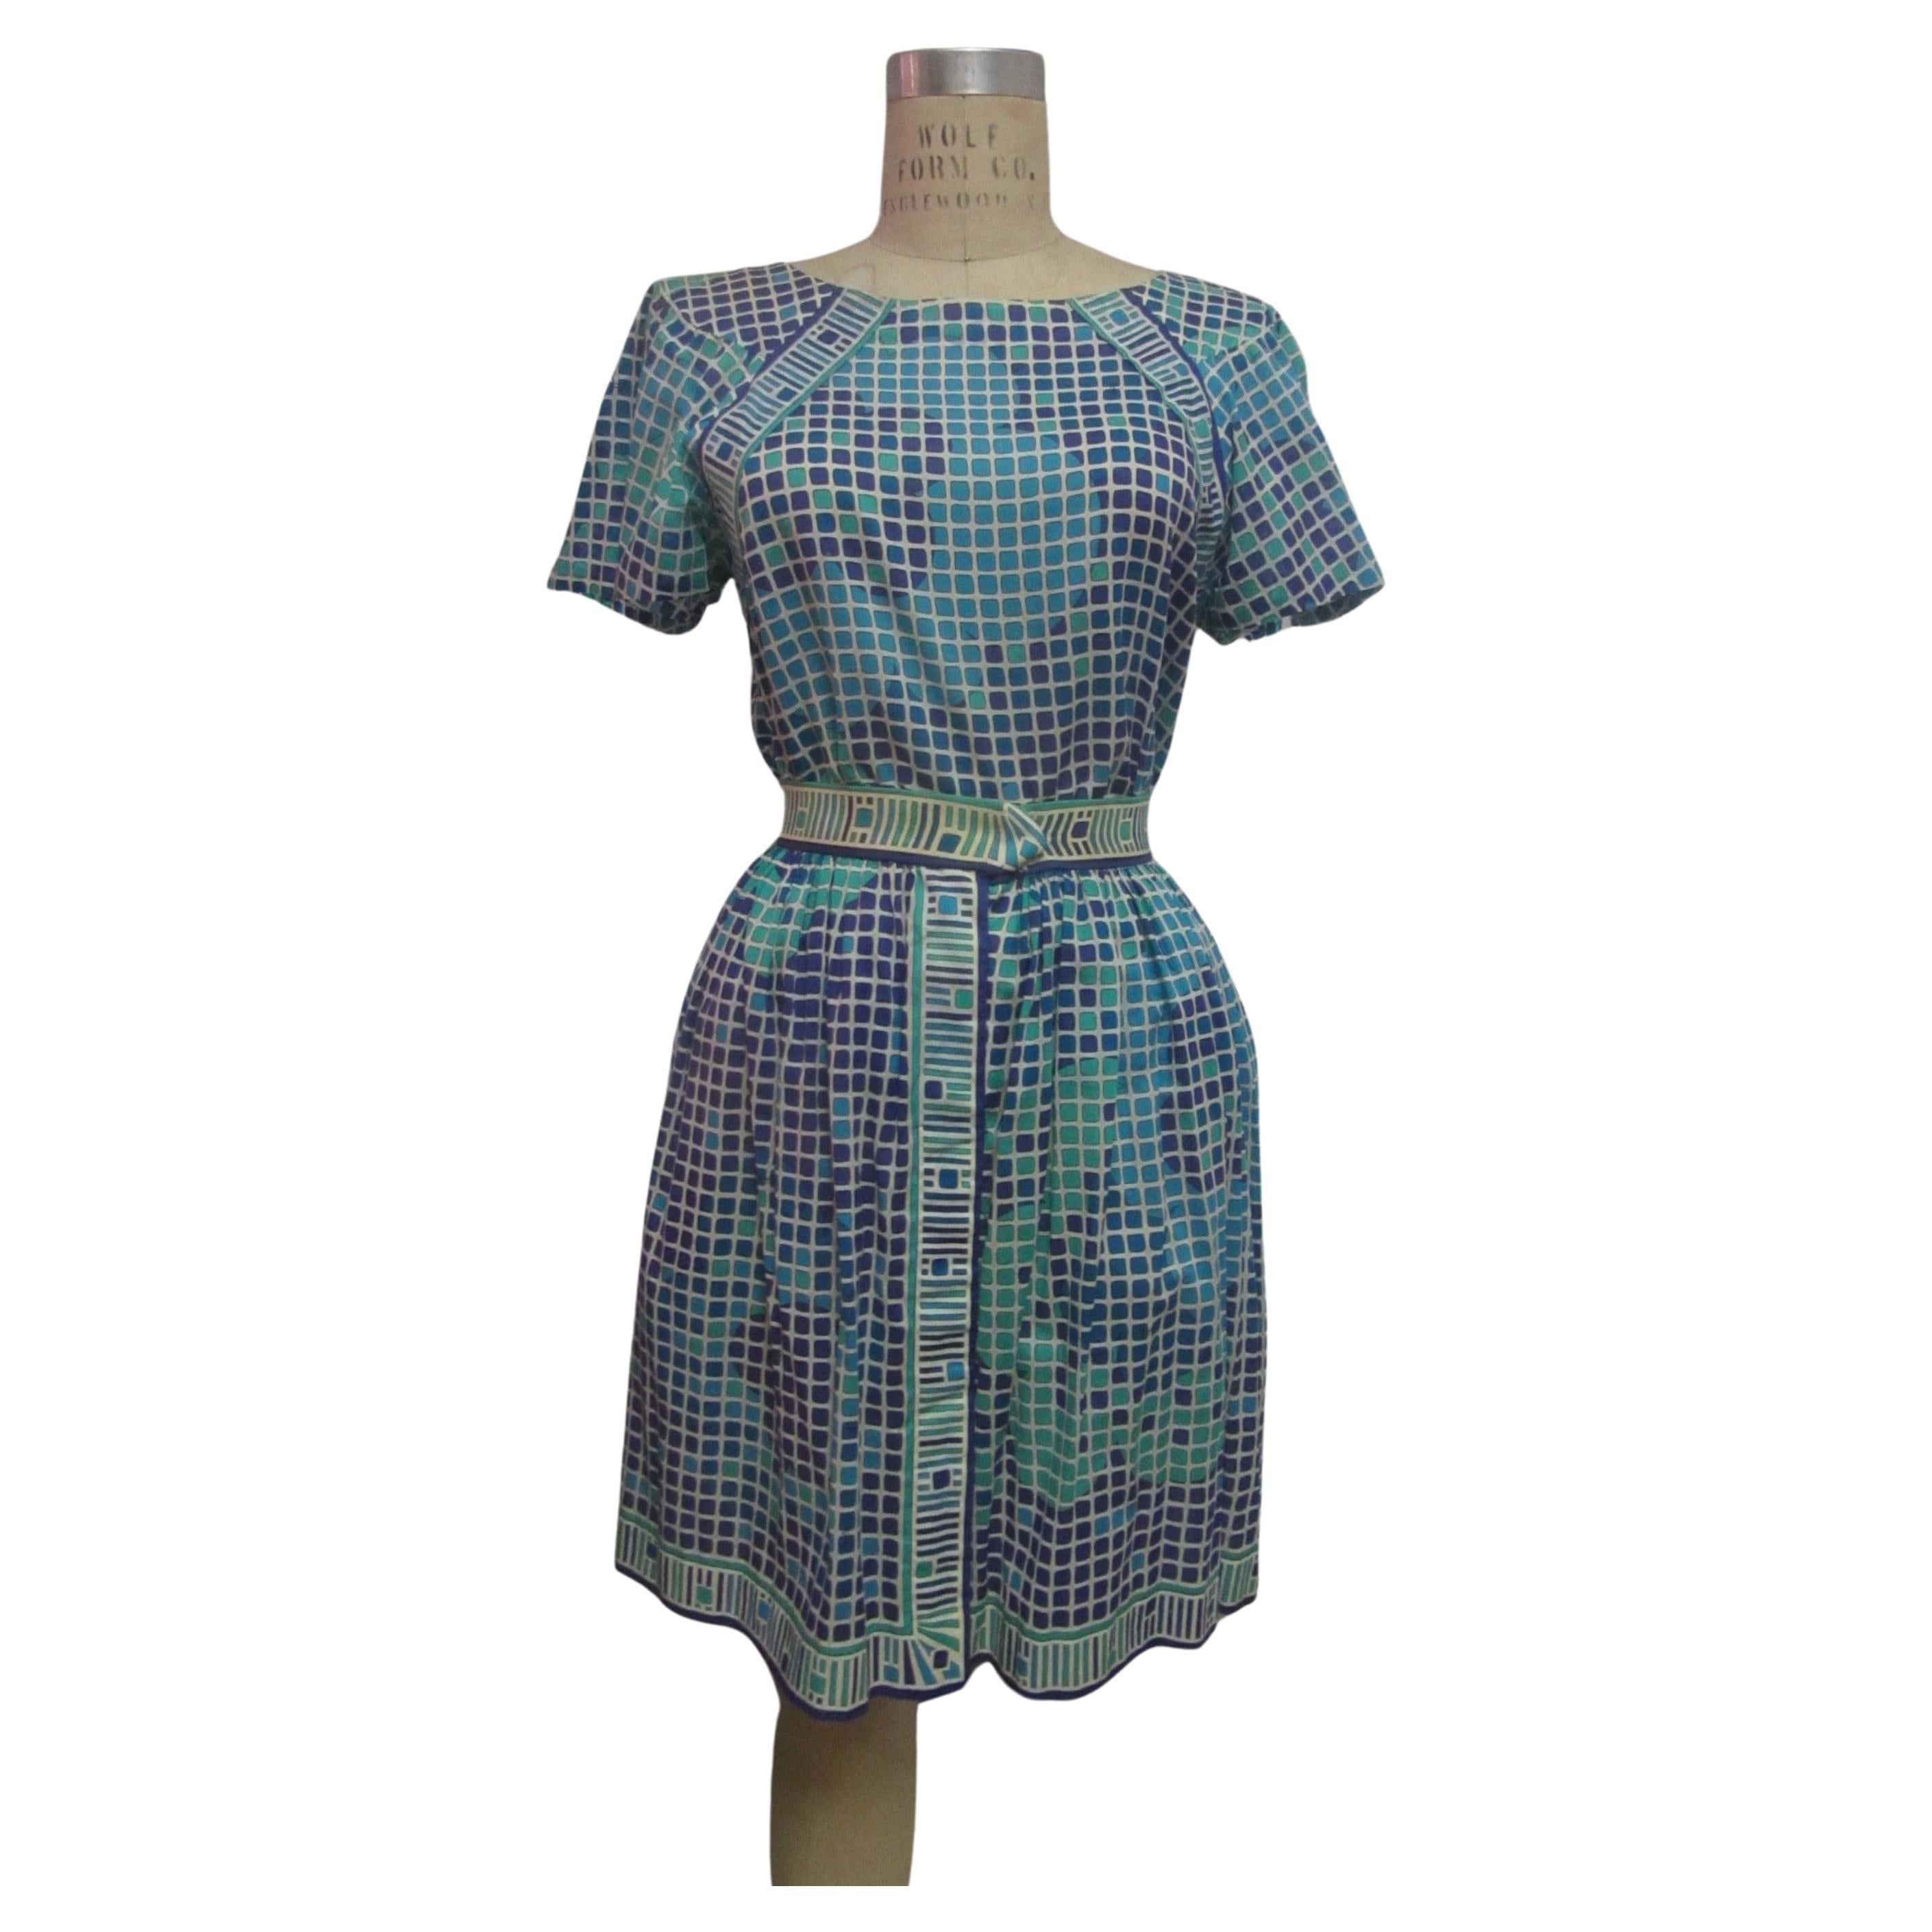 Emilio Pucci Cotton Geometric Print Top and Skirt Set, Circa 1960s For Sale